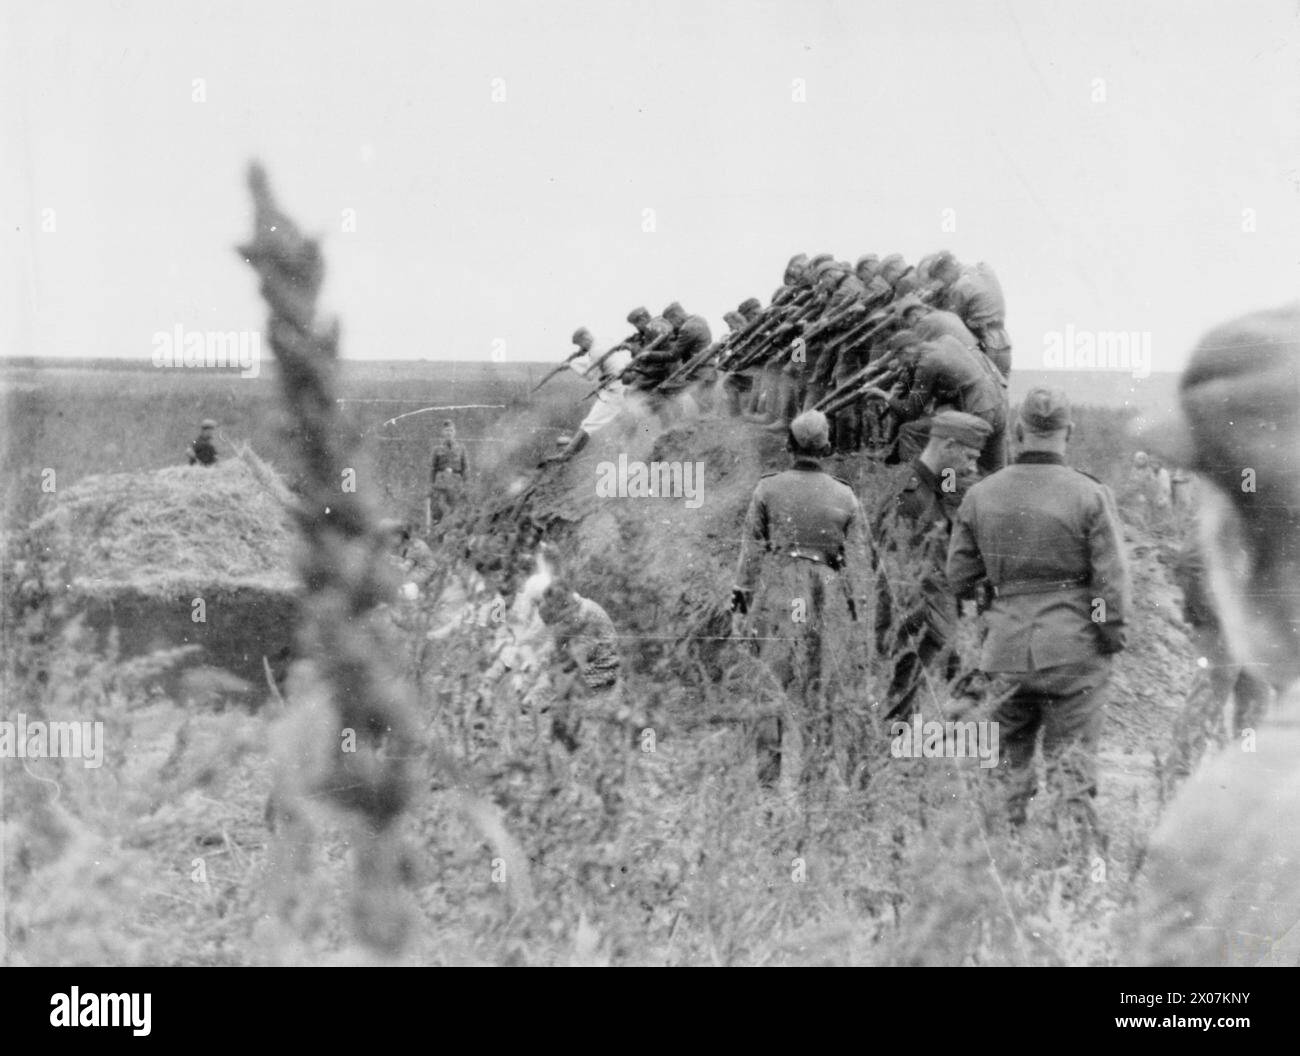 THE EINSATZGRUPPEN ON THE EASTERN FRONT, 1941-1944 - A squad of the Einsatzgruppe D shooting Jewish women in an open pit near Dubossary in Soviet Moldavia, 14 September 1941. The unit's commander, which can be seen in the background, is probably Max Drexel  Einsatzgruppe D Stock Photo